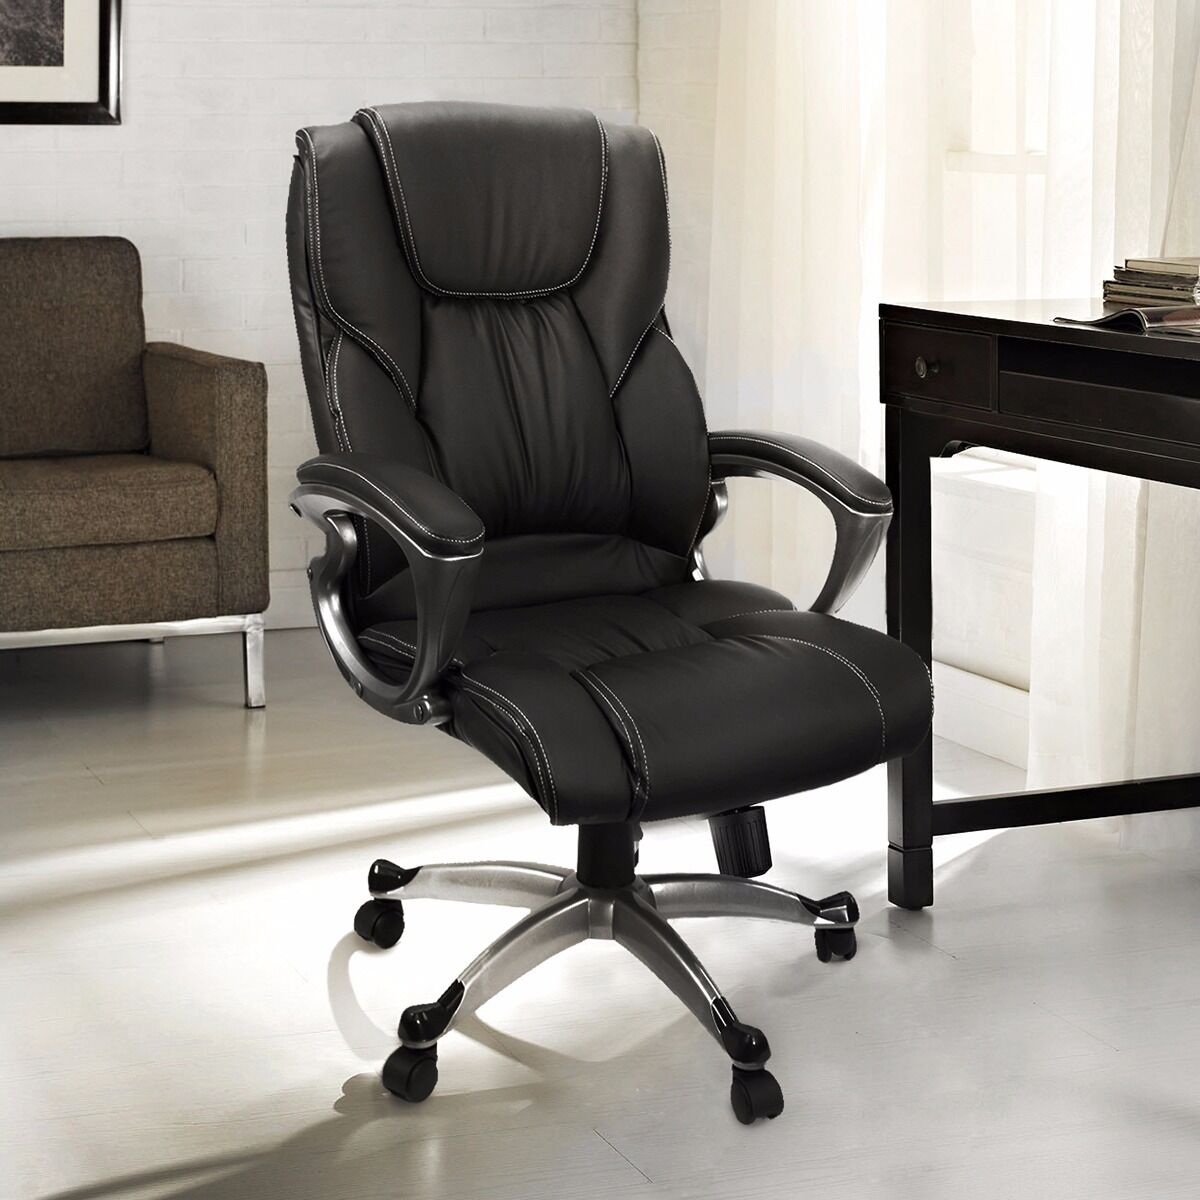 Best office chair manufacturers in 2020